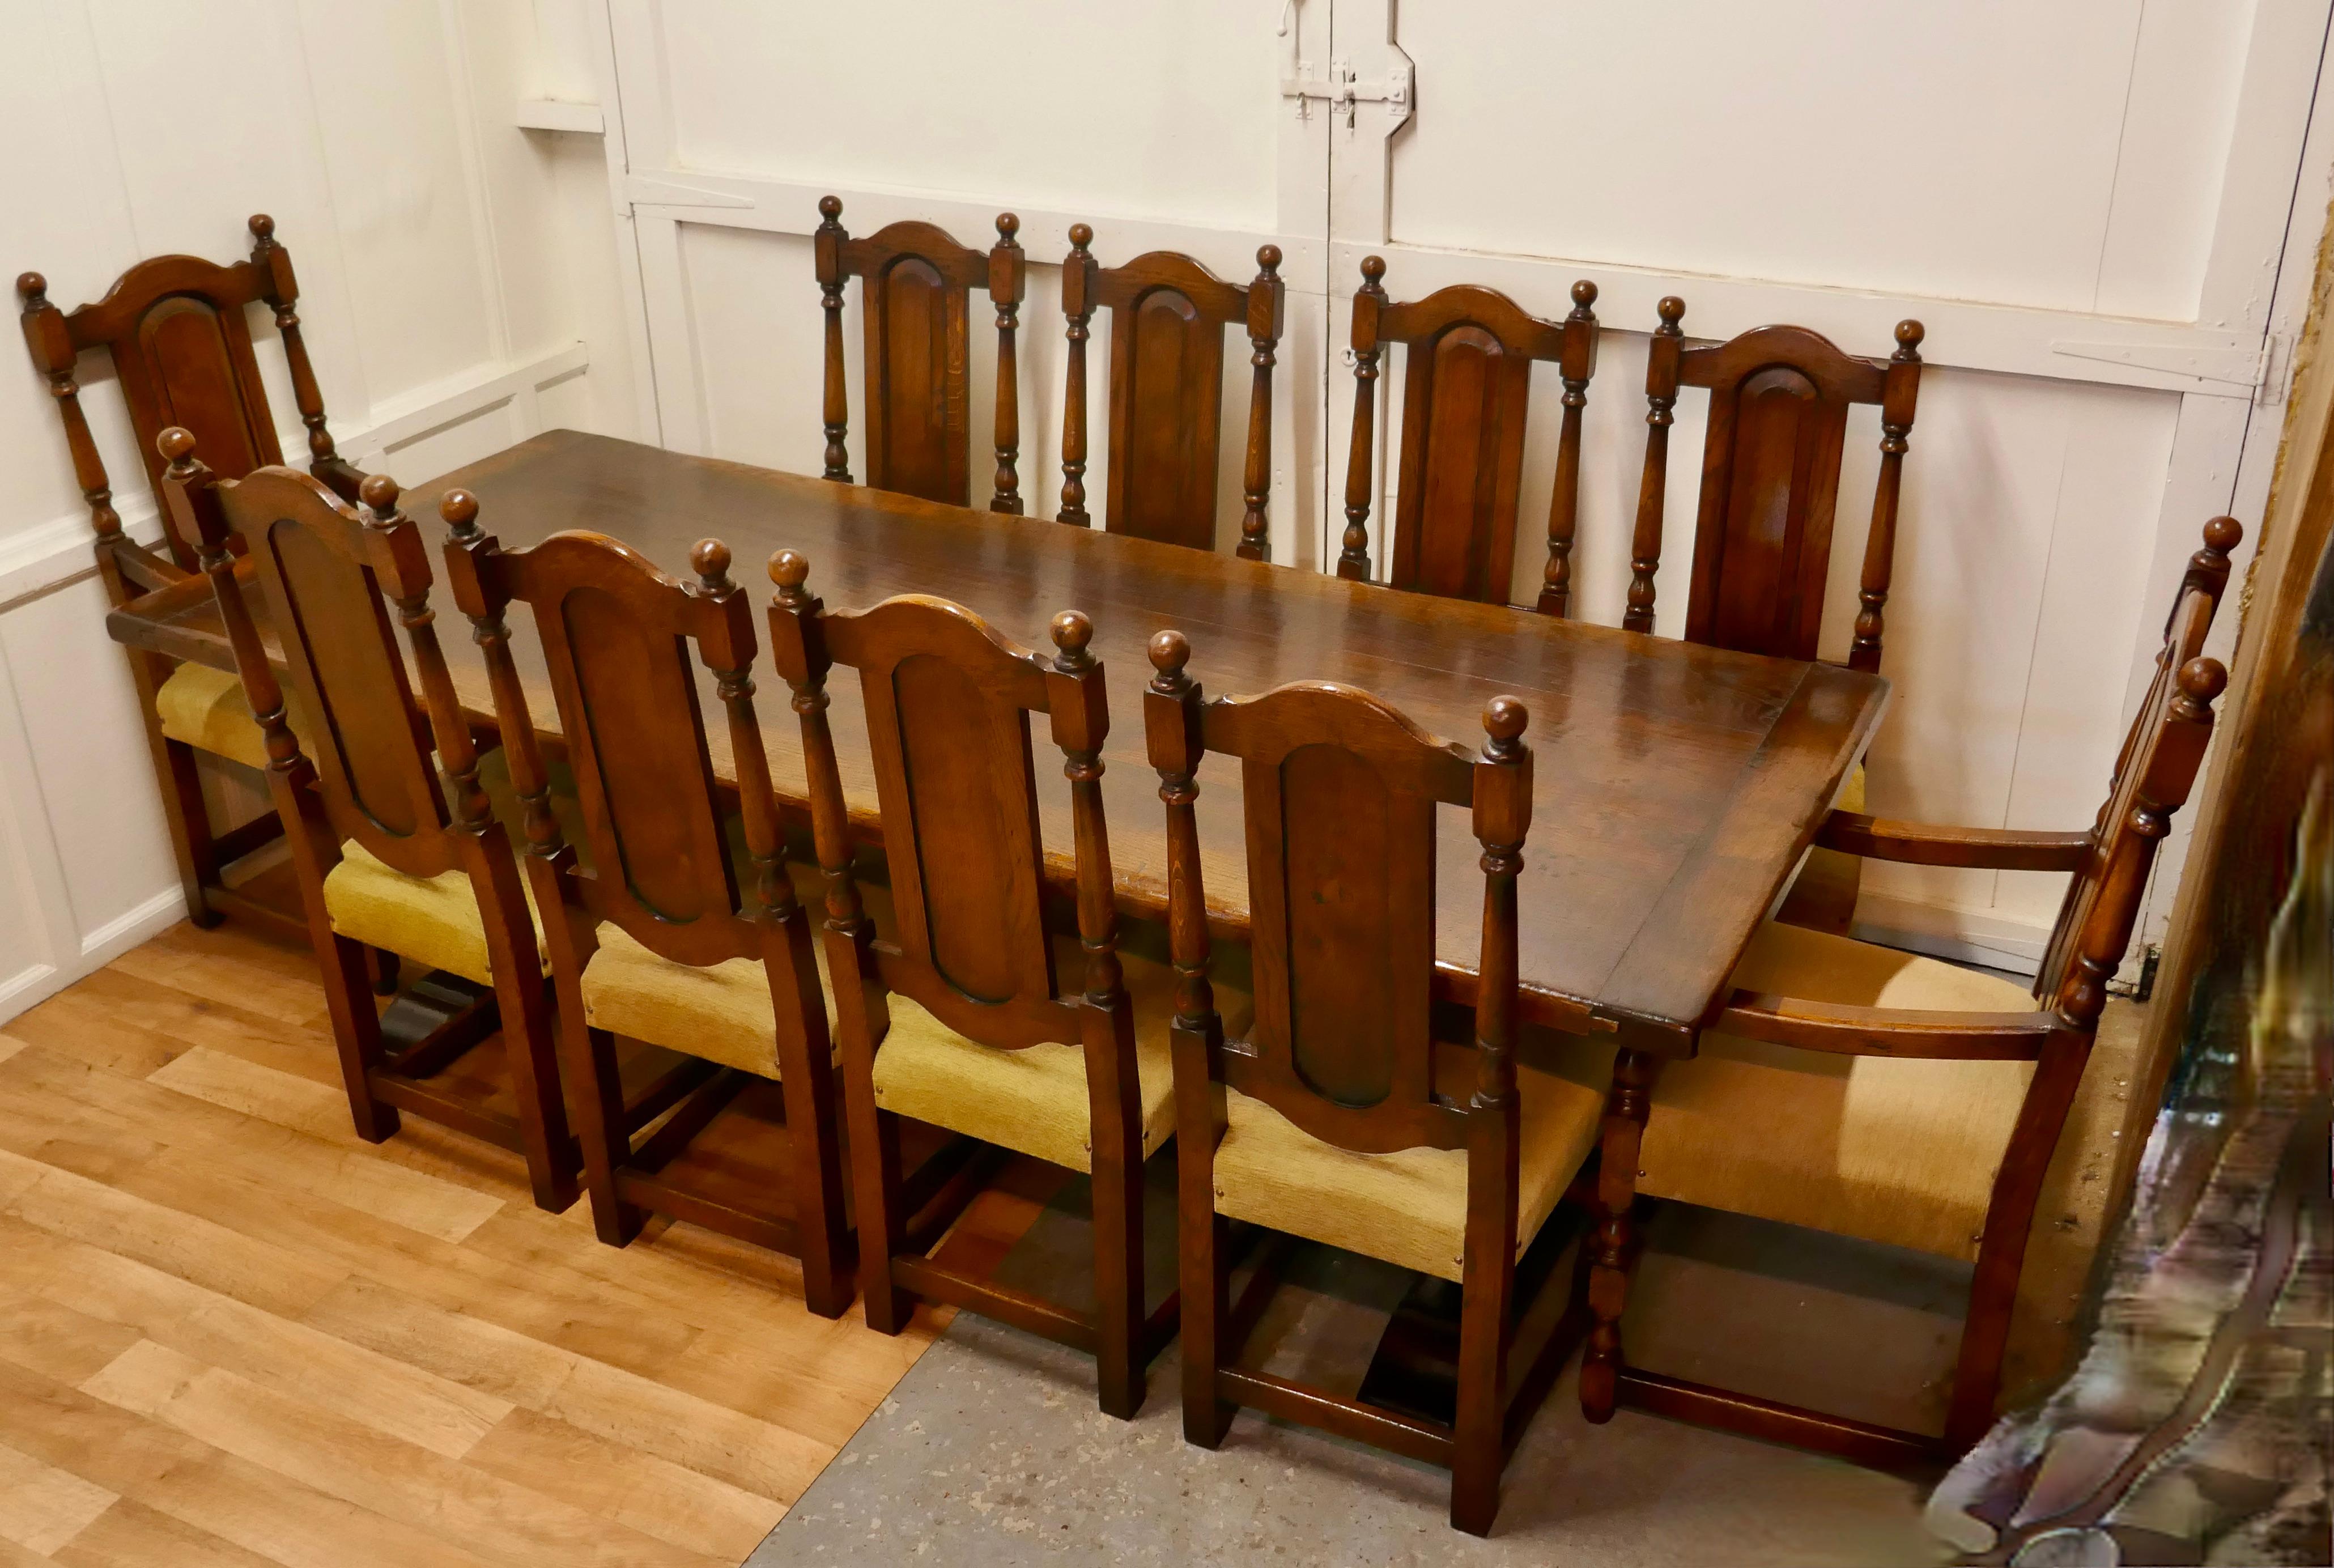 Superior quality Arts & Crafts oak refectory dining table and 10 dining chairs

This is a very handsome table, it has a heavy solid 2” thick 4 plank top with cleated or breadboard ends it has very sturdy 11” end legs with a long wide H stretcher